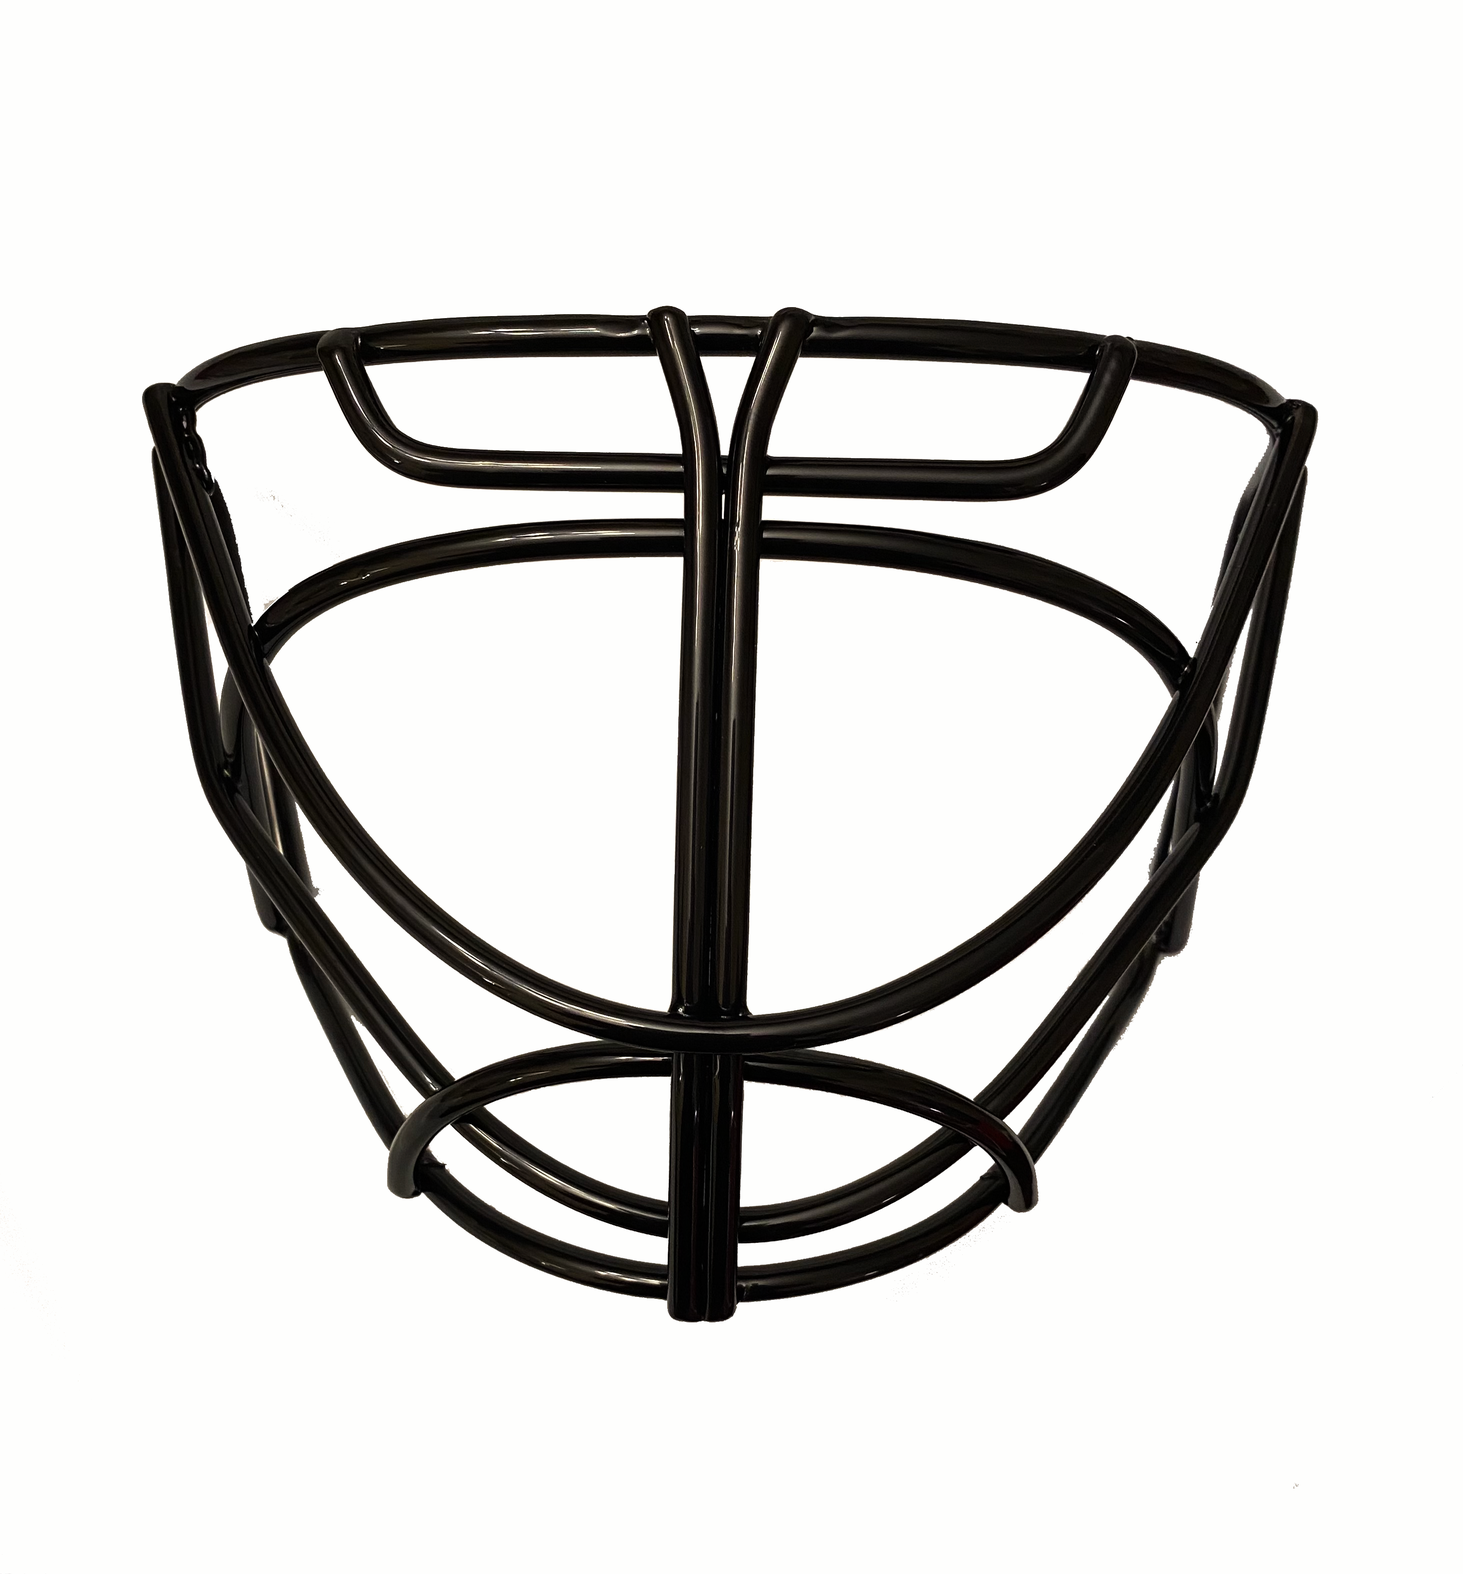 SALE!! Mix Hockey Cat Eye Goalie Cage (Black) Includes clips and screws